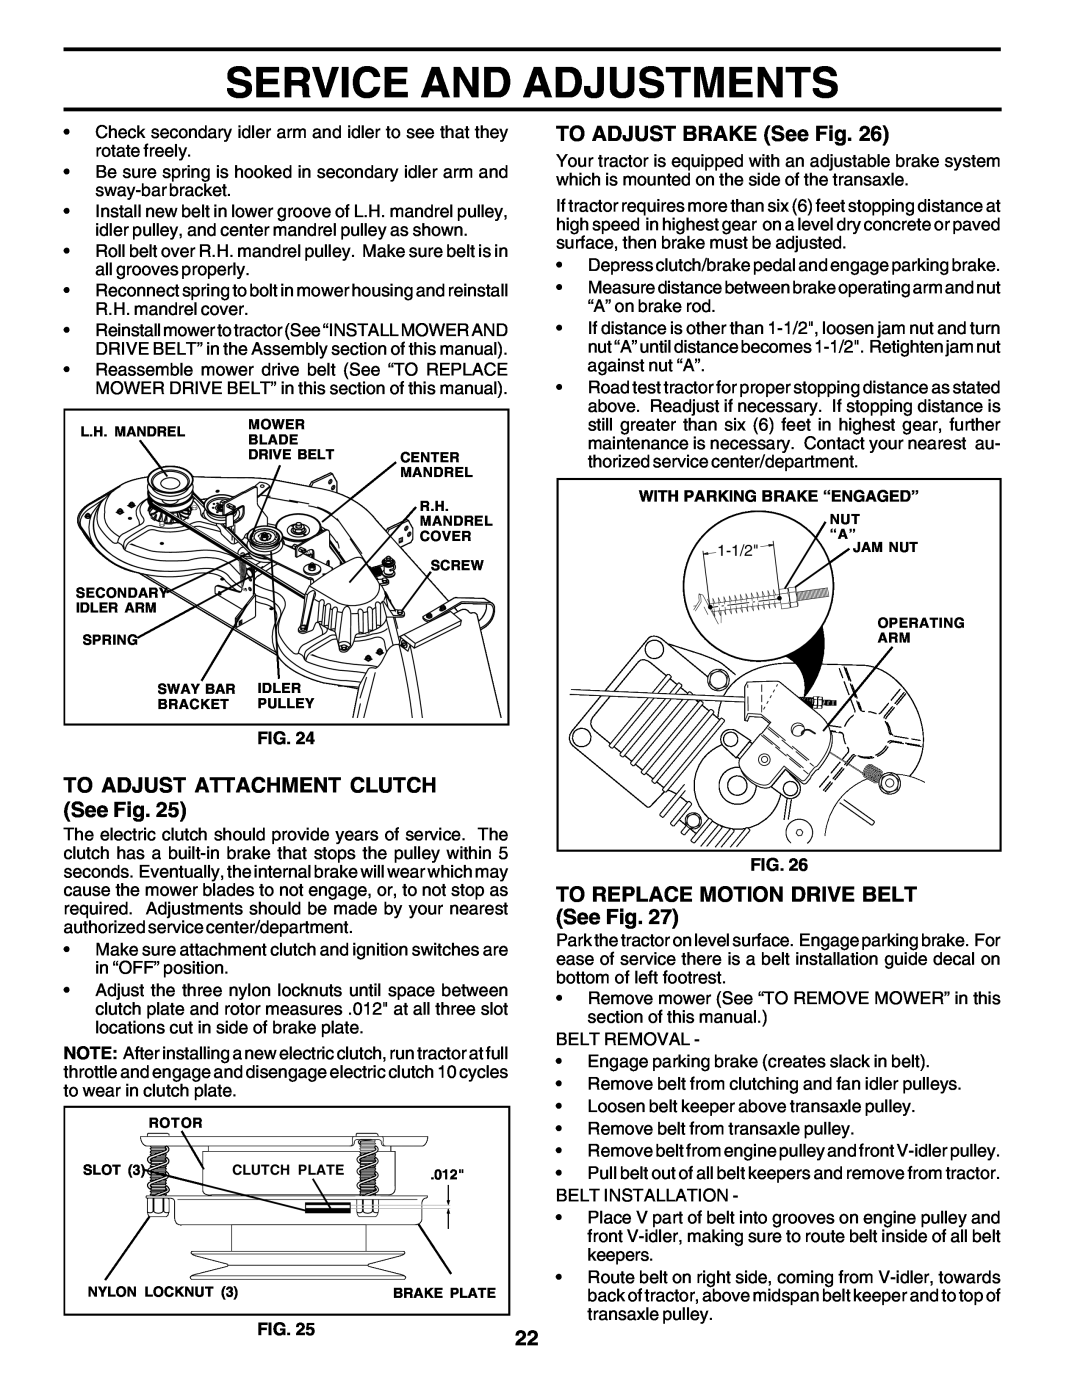 Poulan PRGT22H50C owner manual Service And Adjustments, TO ADJUST ATTACHMENT CLUTCH See Fig, TO ADJUST BRAKE See Fig, 1-1/2 